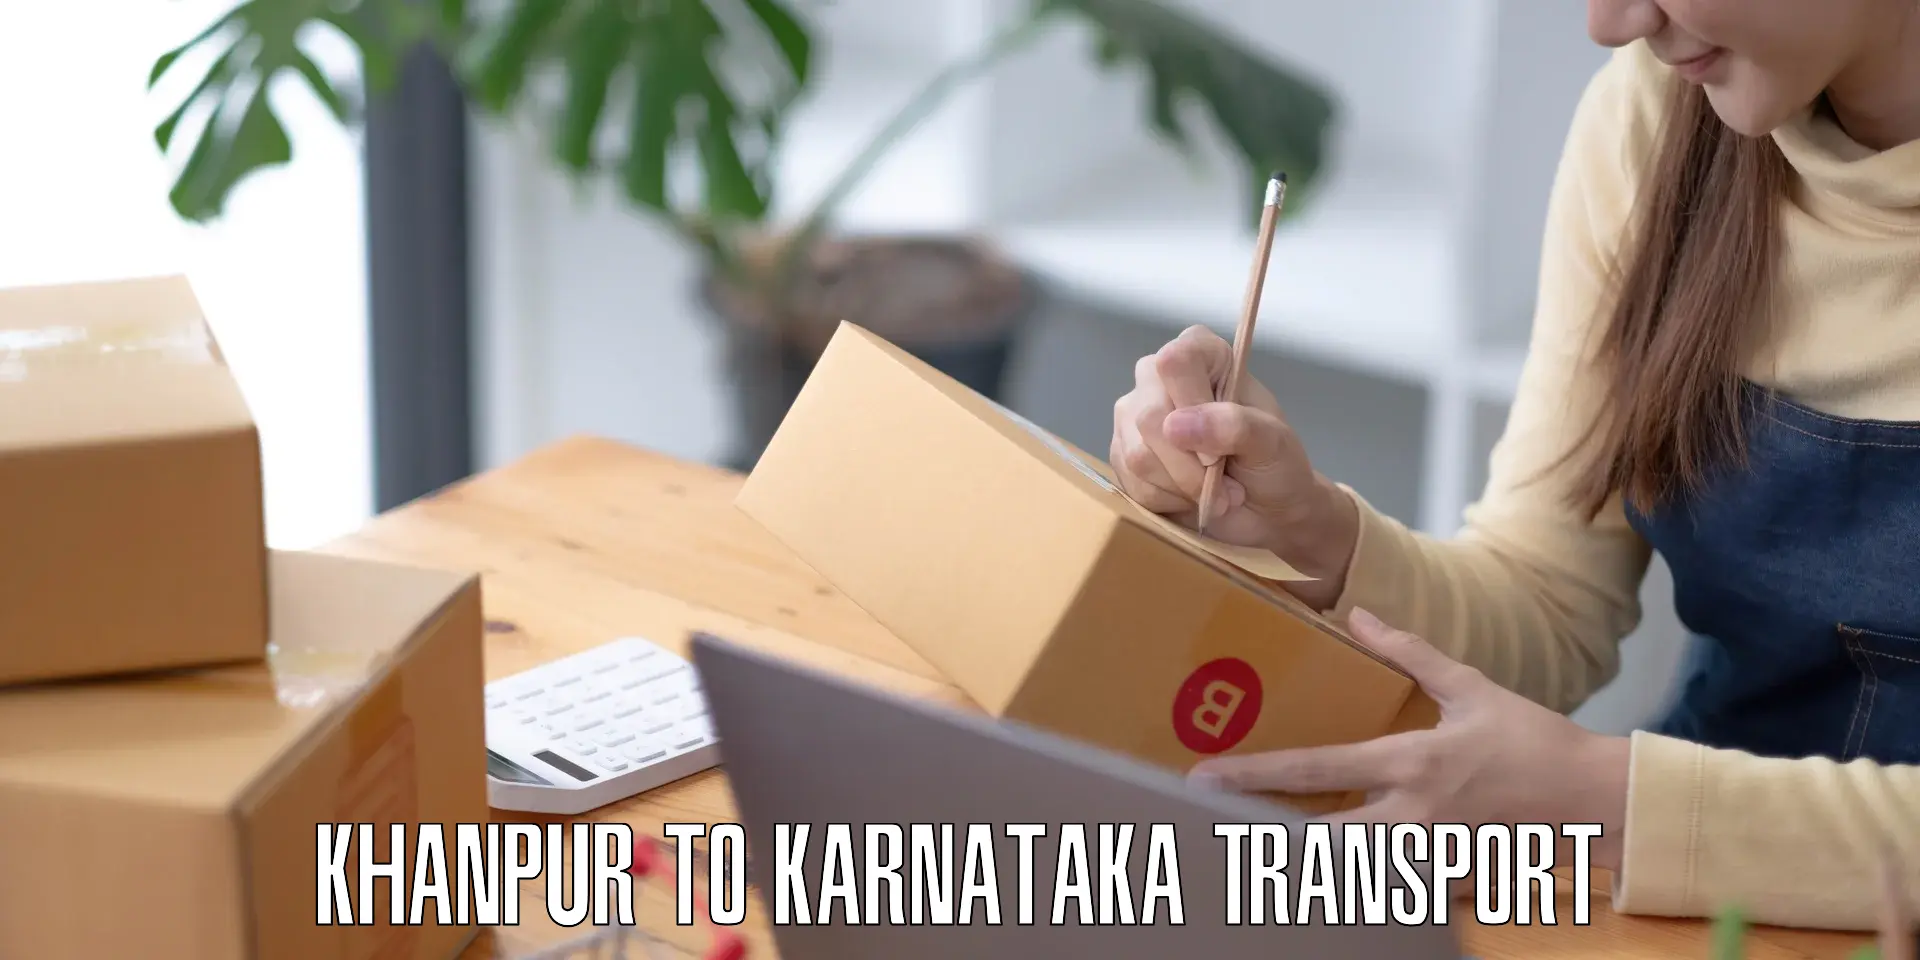 Road transport online services in Khanpur to Harohalli